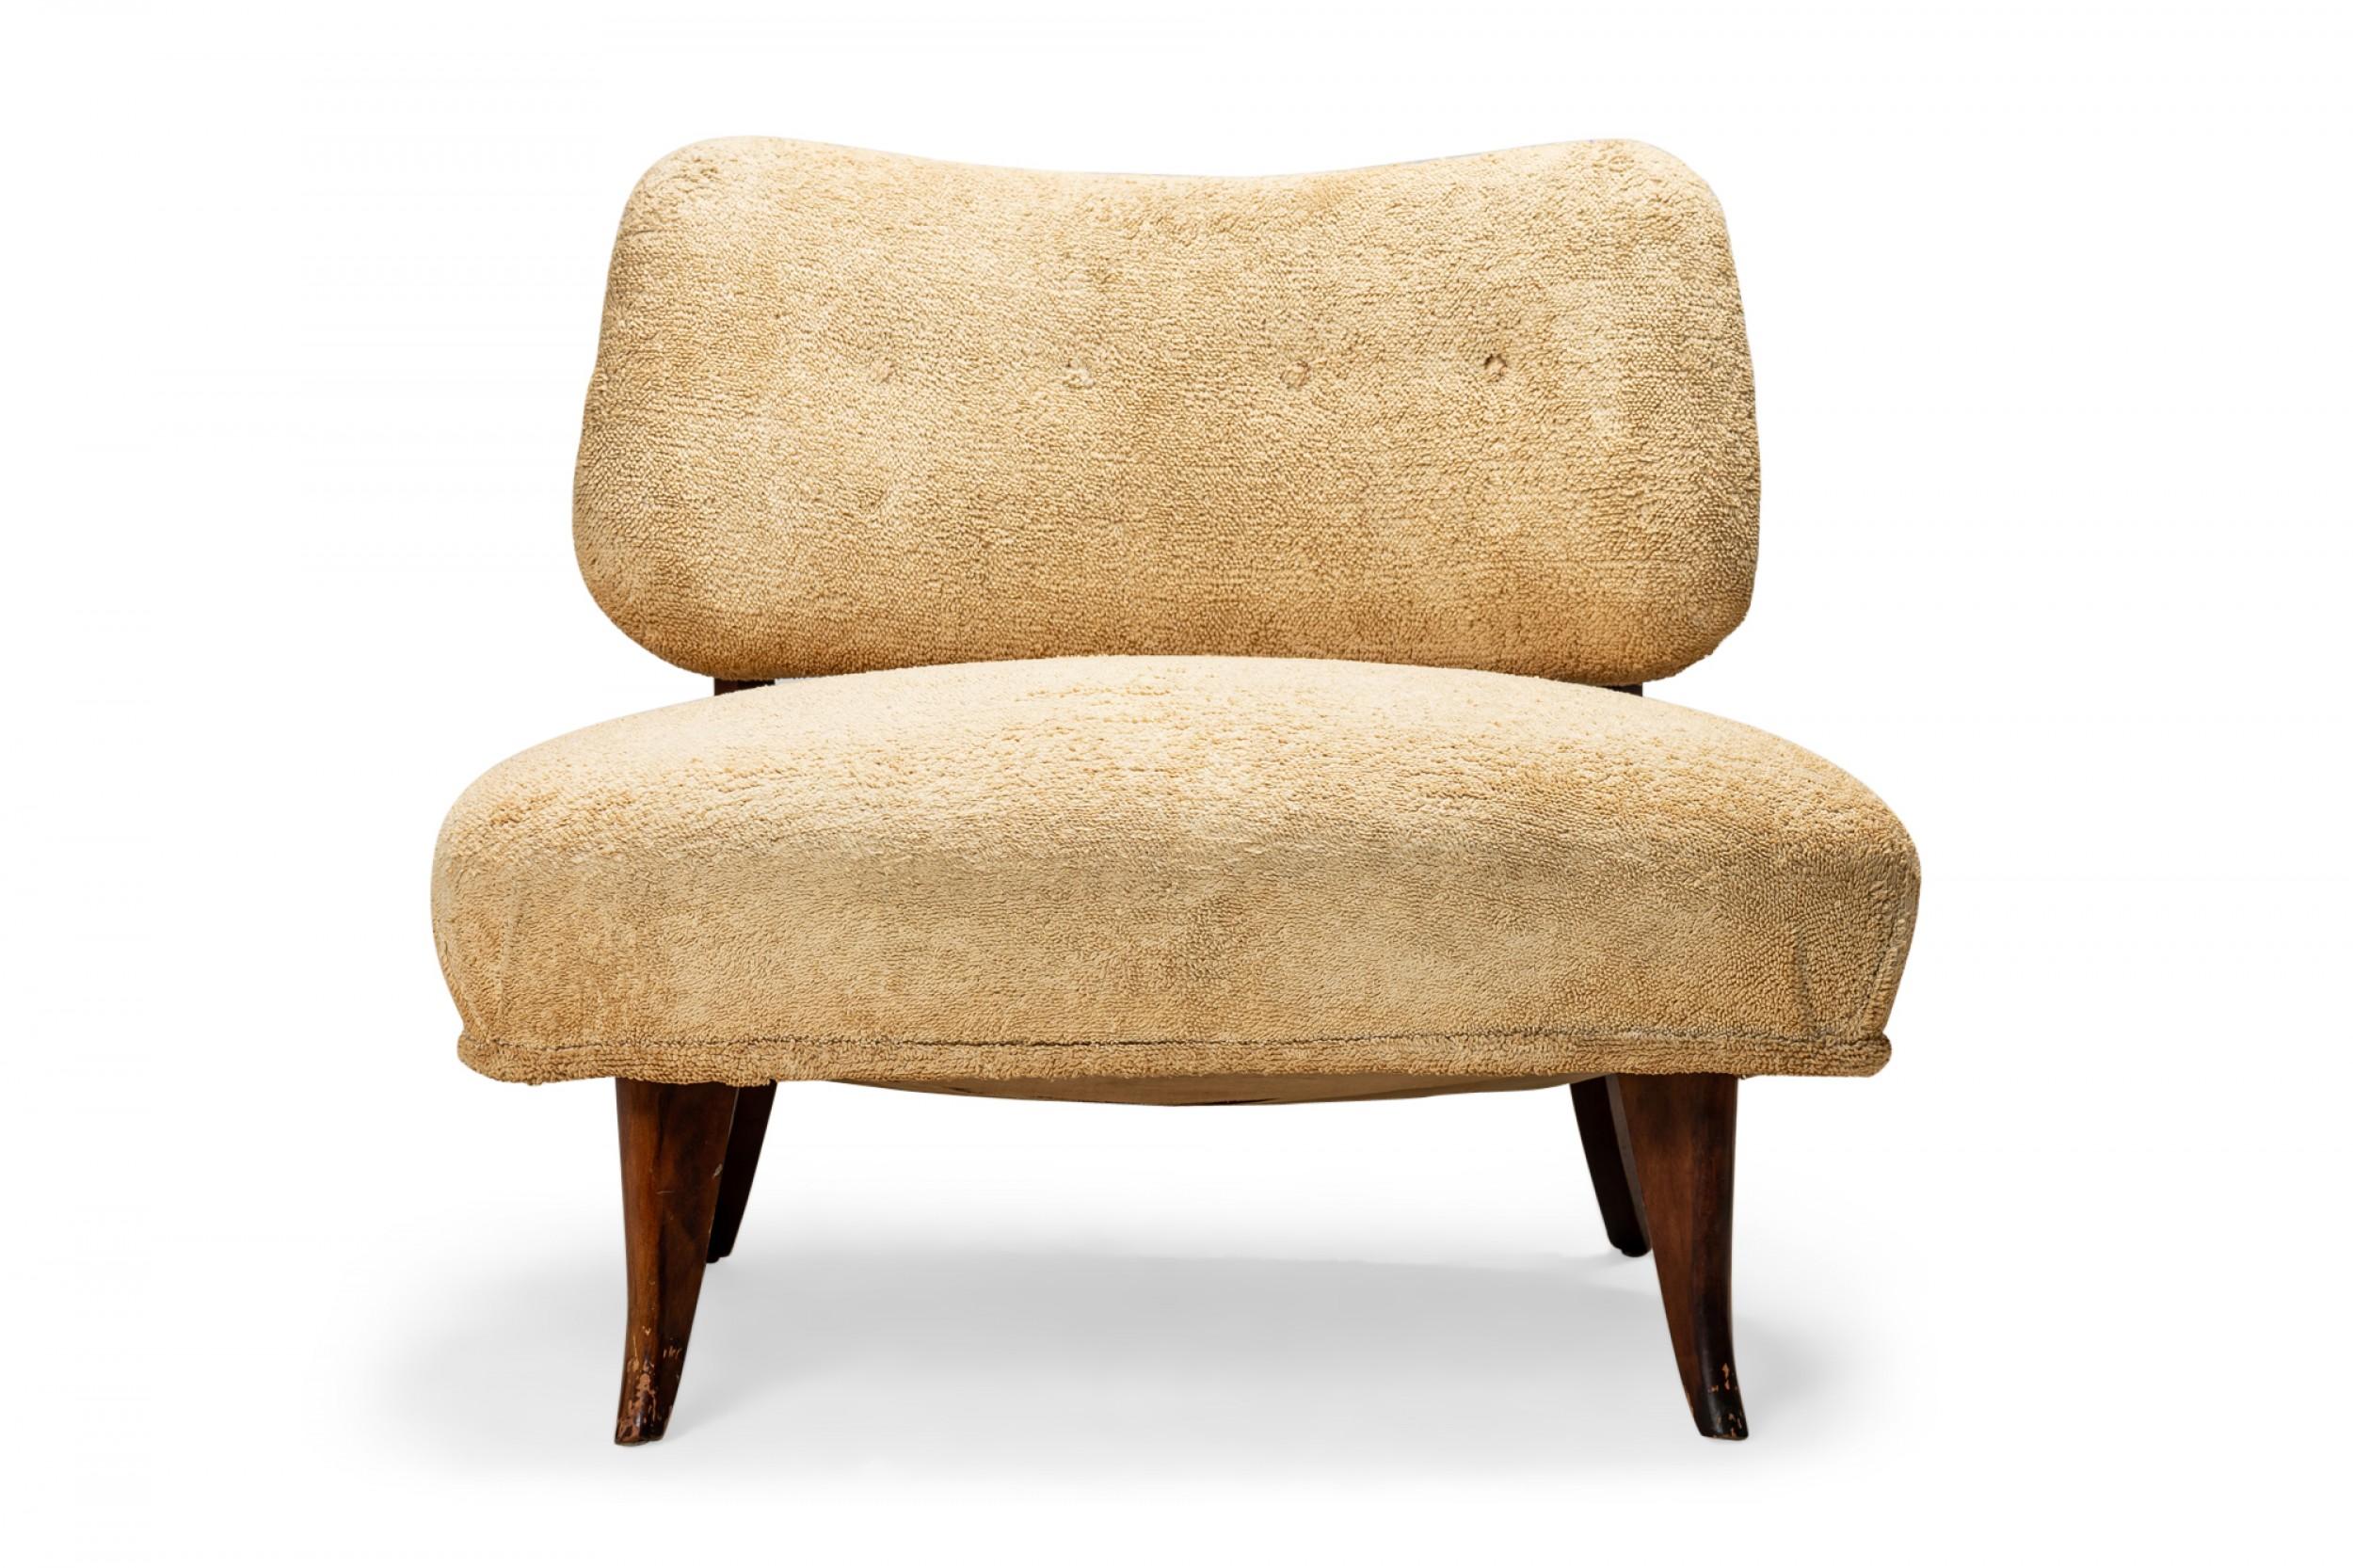 American Art Deco low slipper / side chair with beige terrycloth upholstery, resting on four short walnut legs. (manner of T.H. ROBSJOHN-GIBBINGS)
